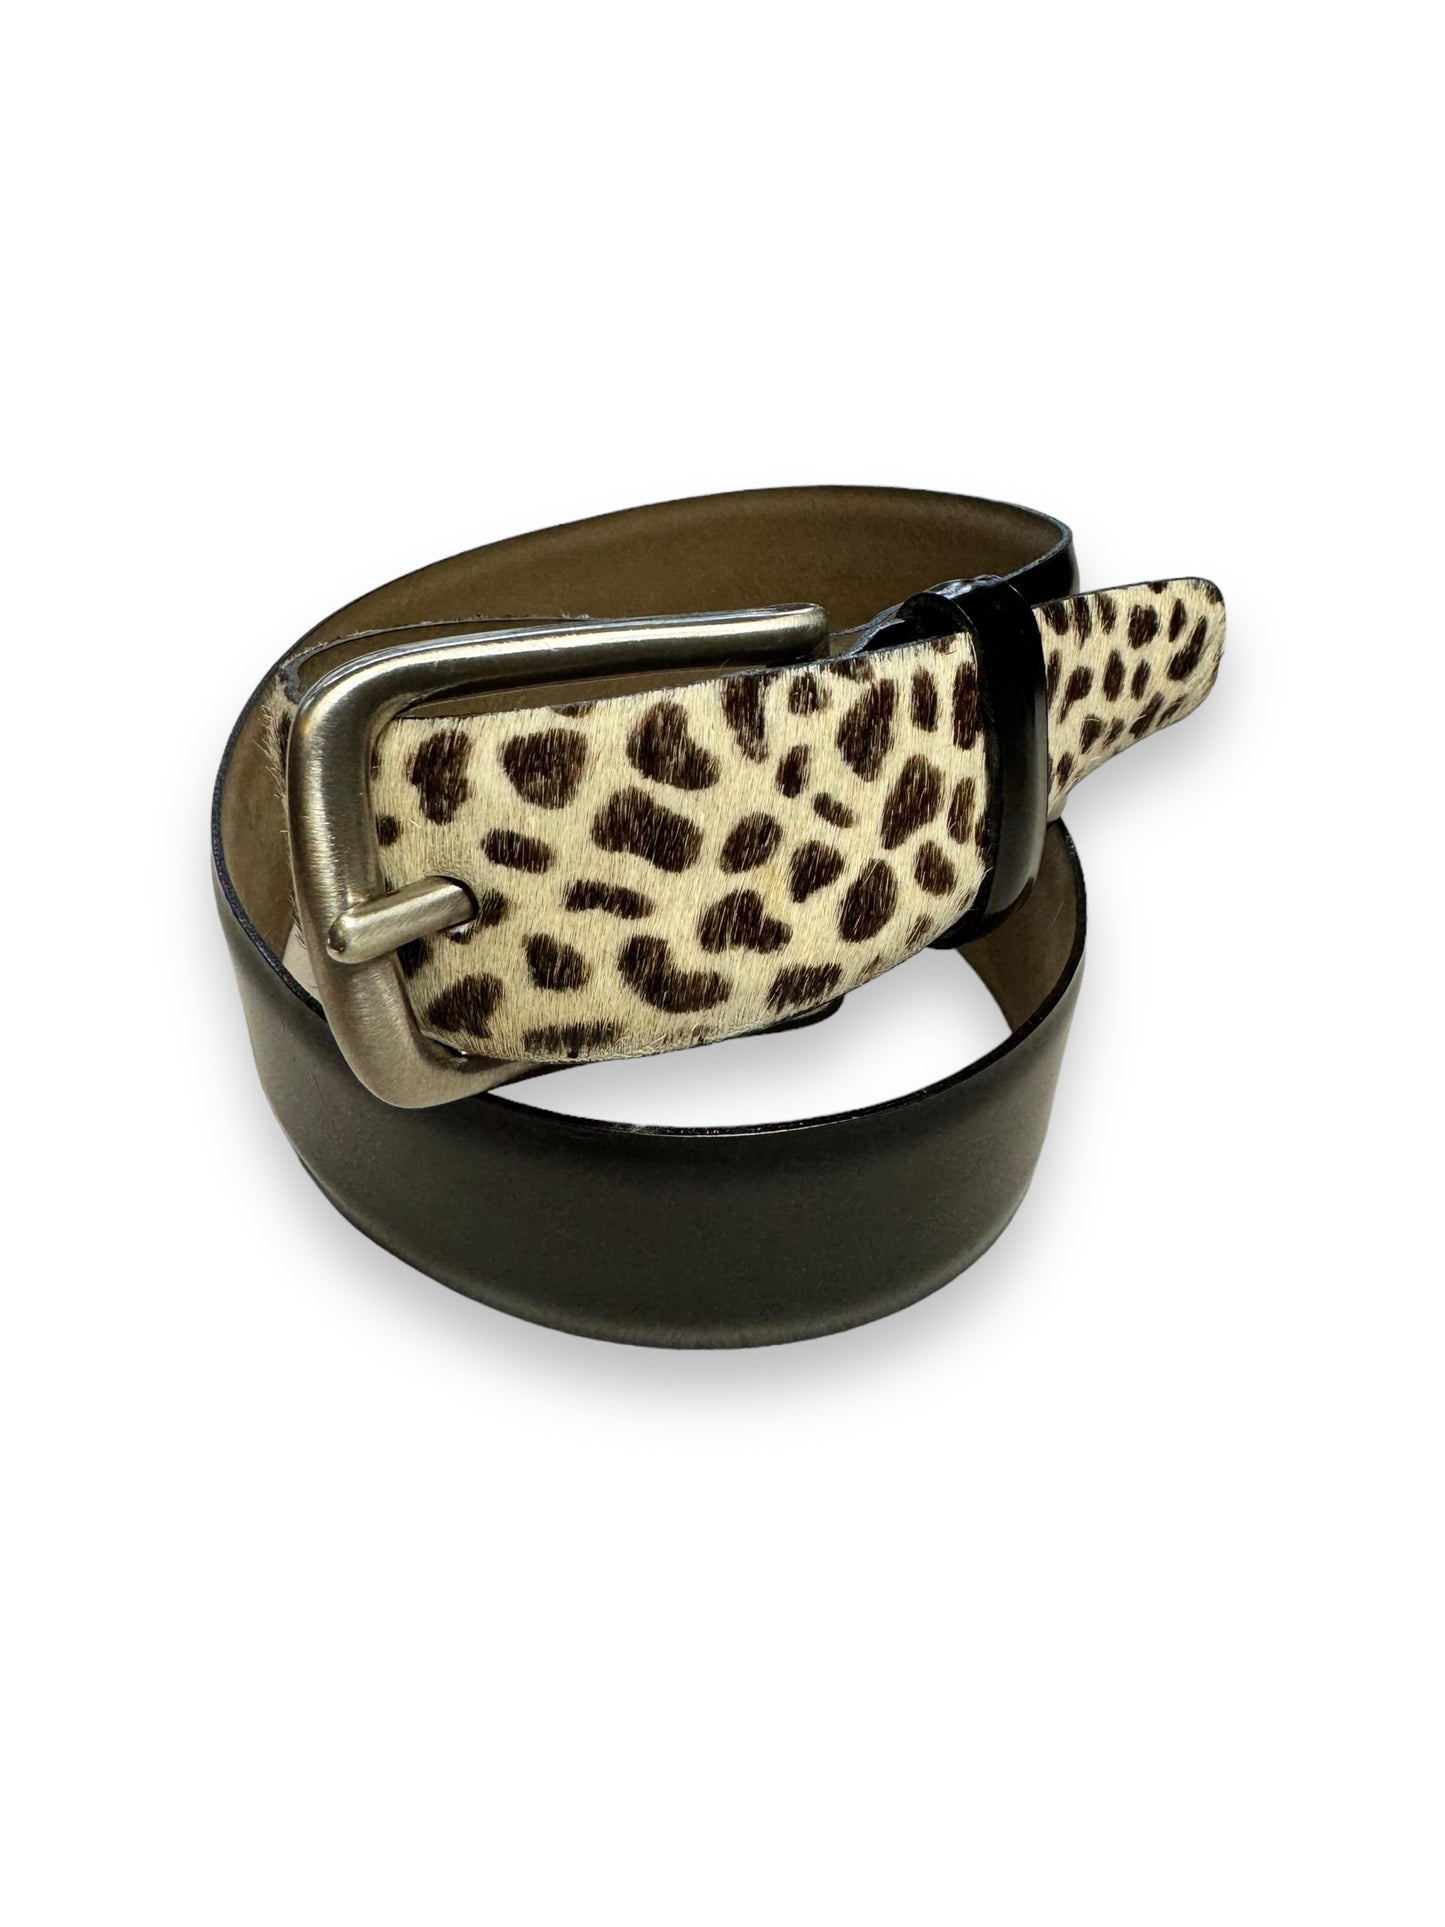 Y2K Linea Pelle Cowhide and Polished Leather Belt